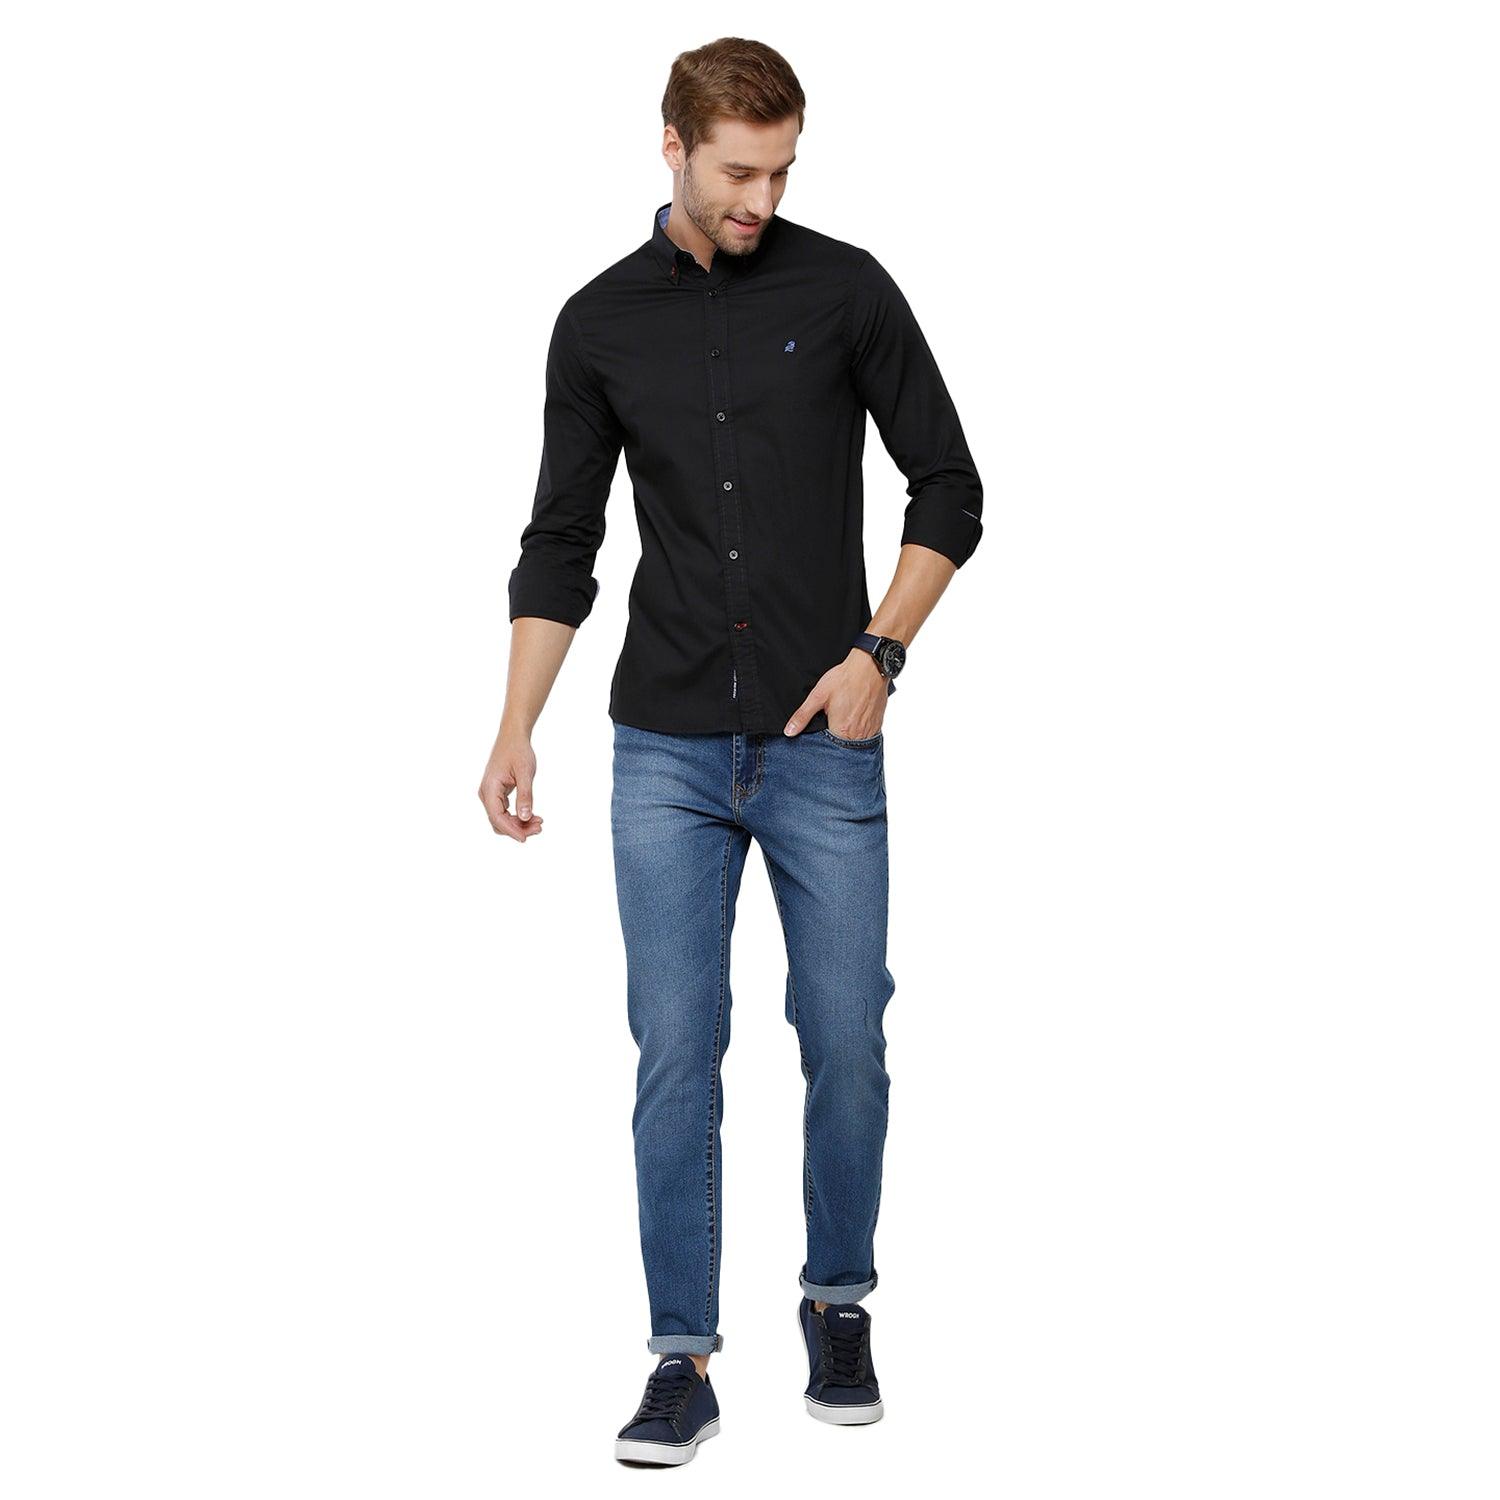 Double two Men Solid Black Button down collar Long Sleeves 100% Cotton Slim Fit Casual shirt